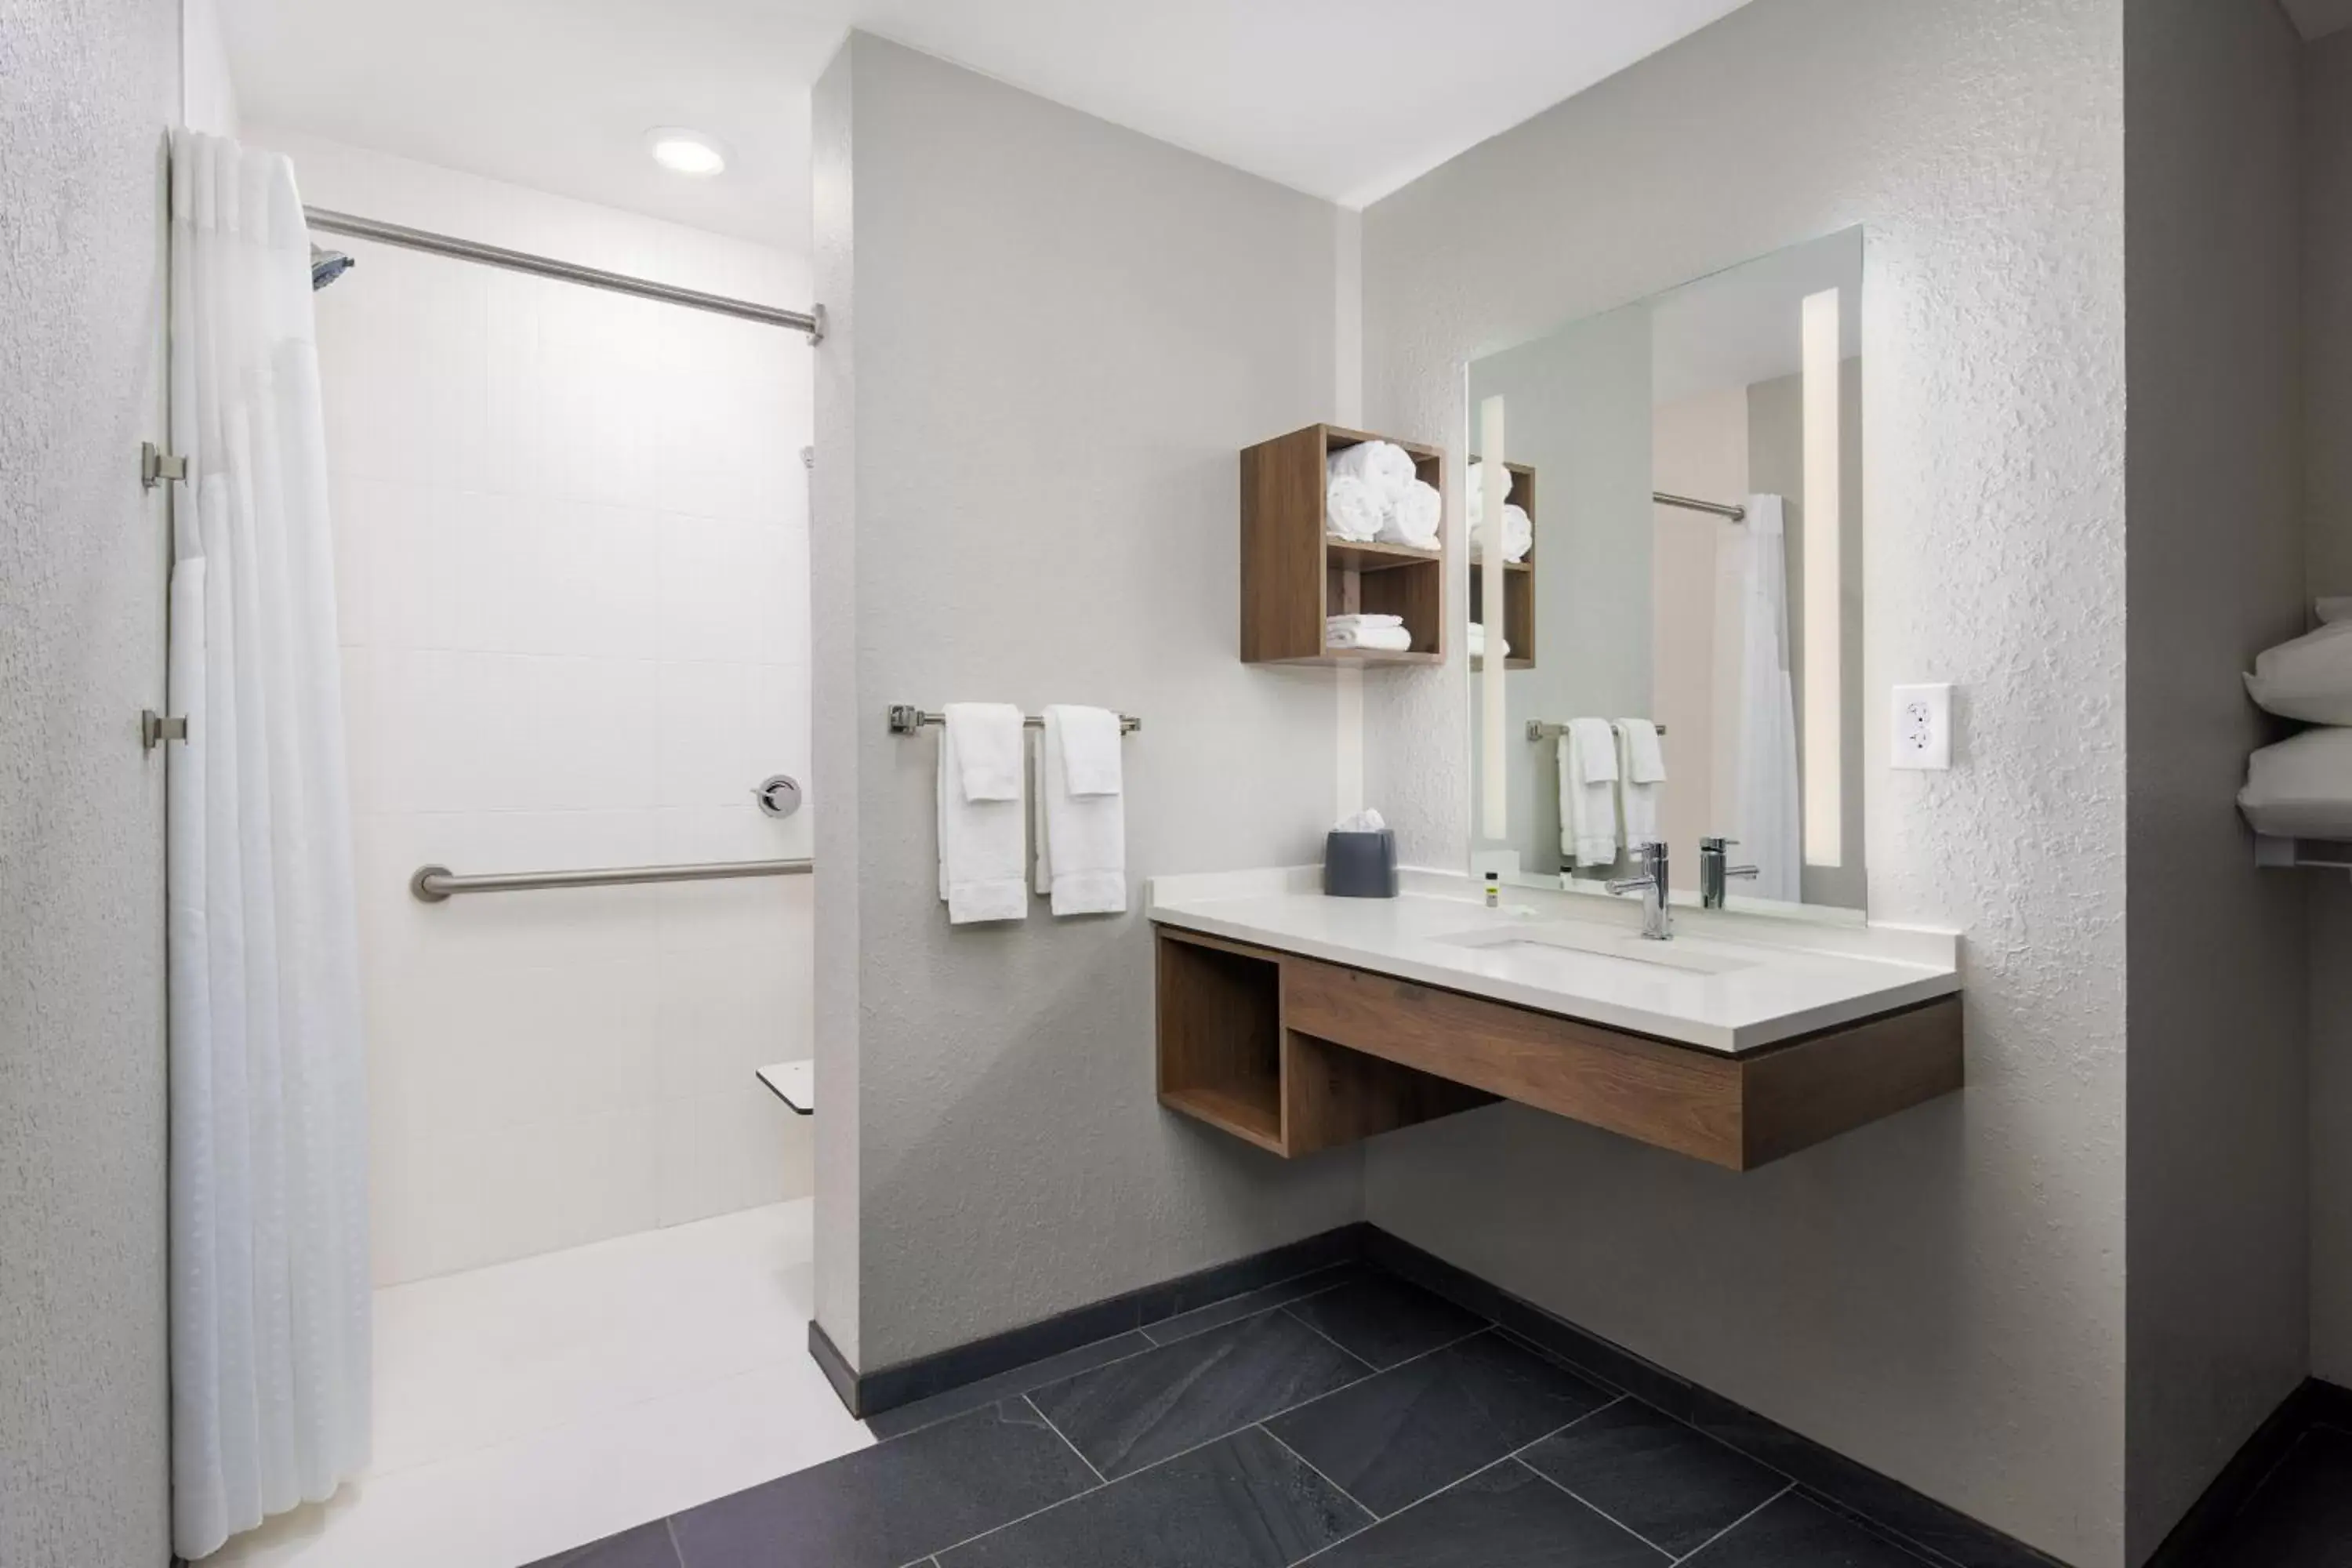 King Studio with Accessible Roll In Shower - Non-Smoking in Staybridge Suites - Auburn - University Area, an IHG Hotel